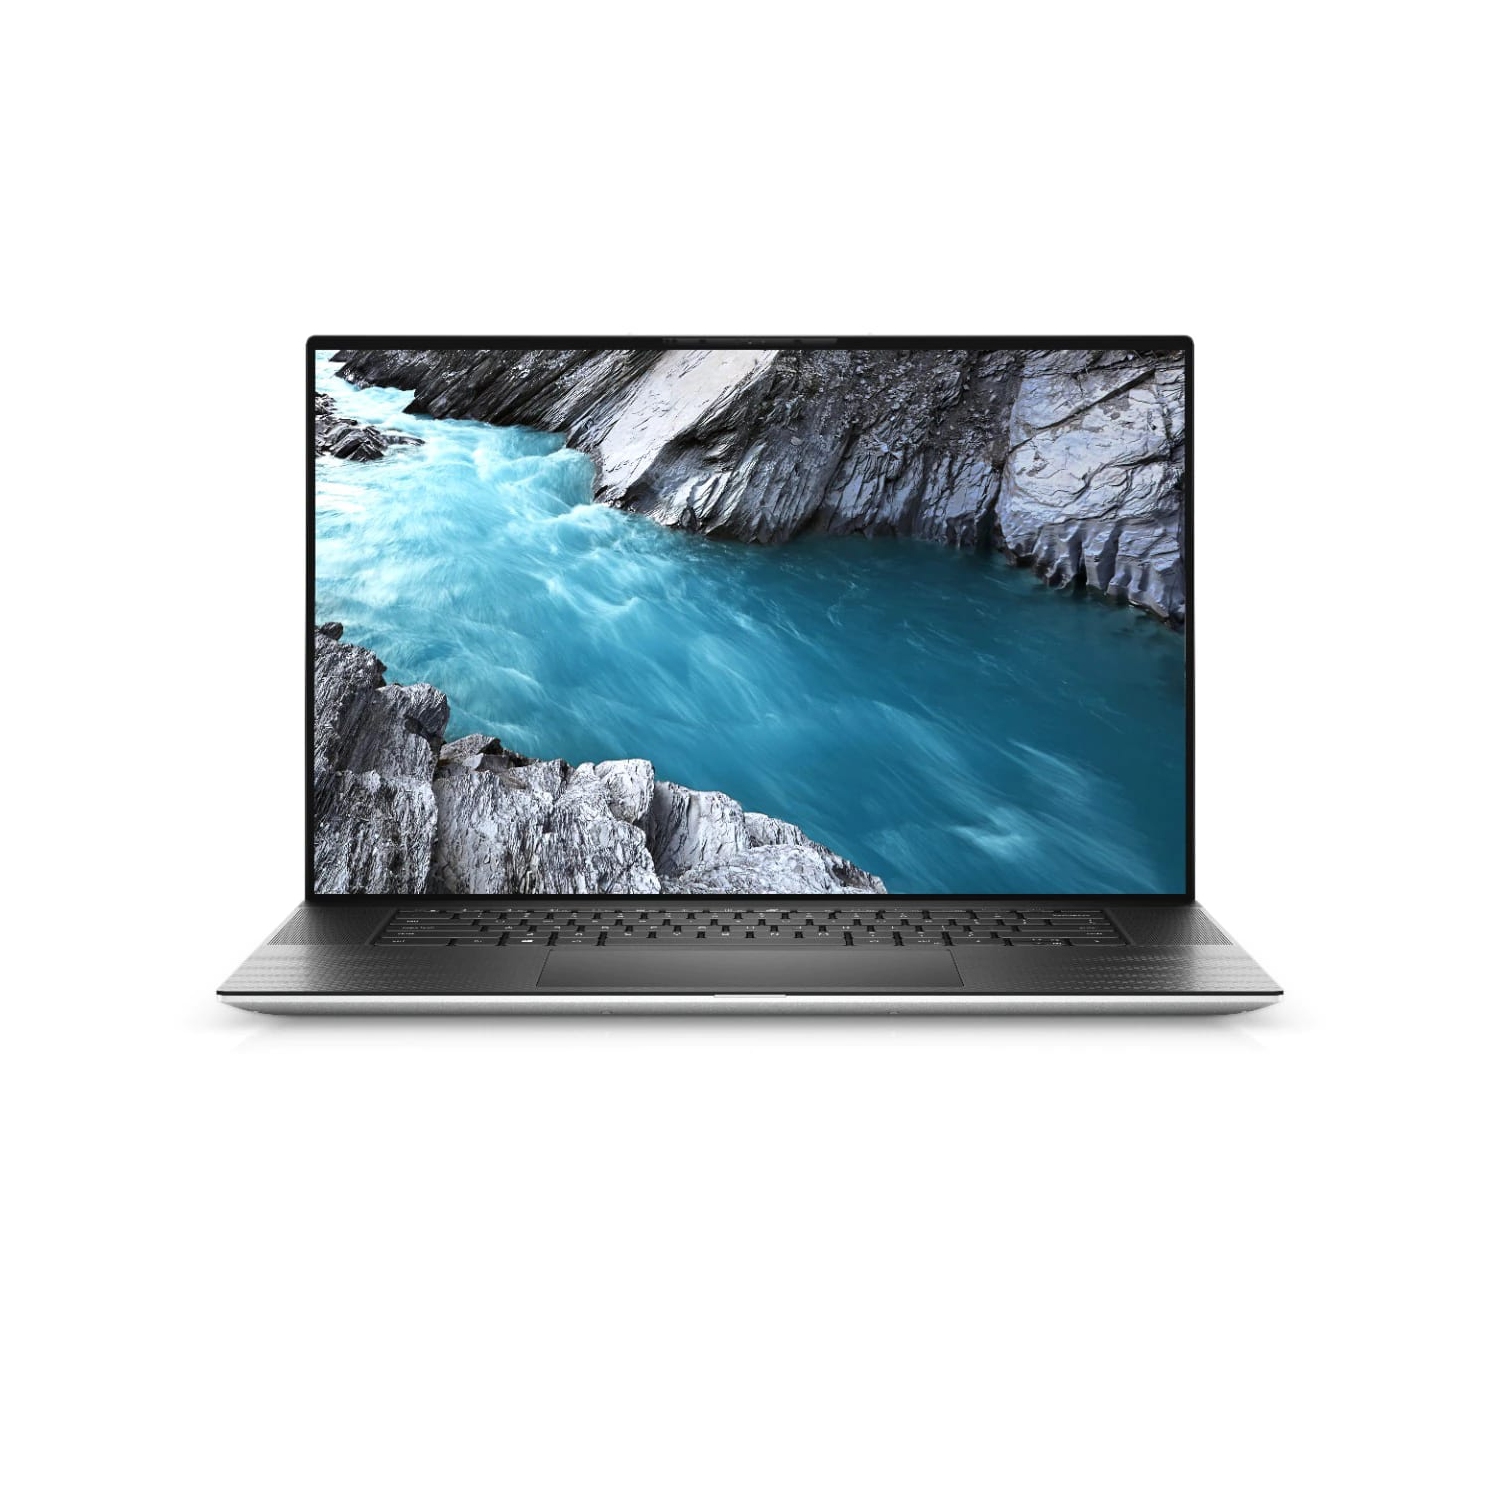 Refurbished (Excellent) - Dell XPS 17 9700 Laptop (2020) | 17" 4K Touch | Core i9 - 1TB SSD - 64GB RAM - RTX 2060 | 8 Cores @ 5.3 GHz - 10th Gen CPU Certified Refurbished